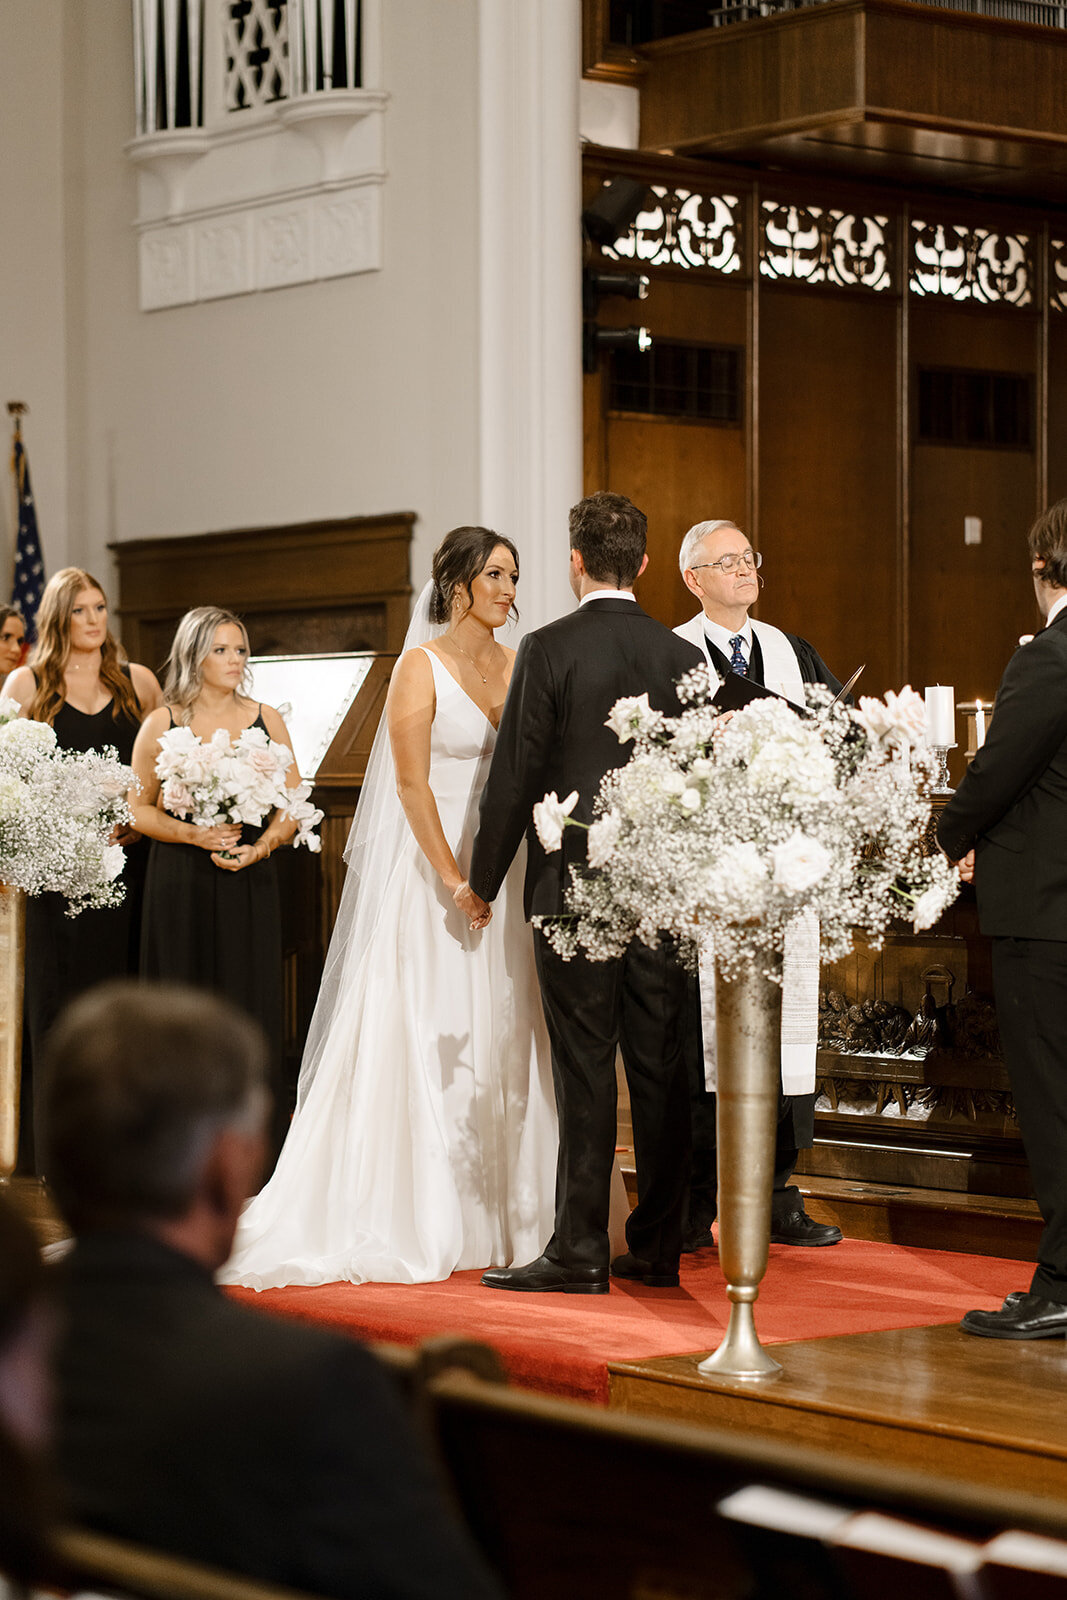 Kylie and Jack at The Grand Hall - Kansas City Wedding Photograpy - Nick and Lexie Photo Film-656